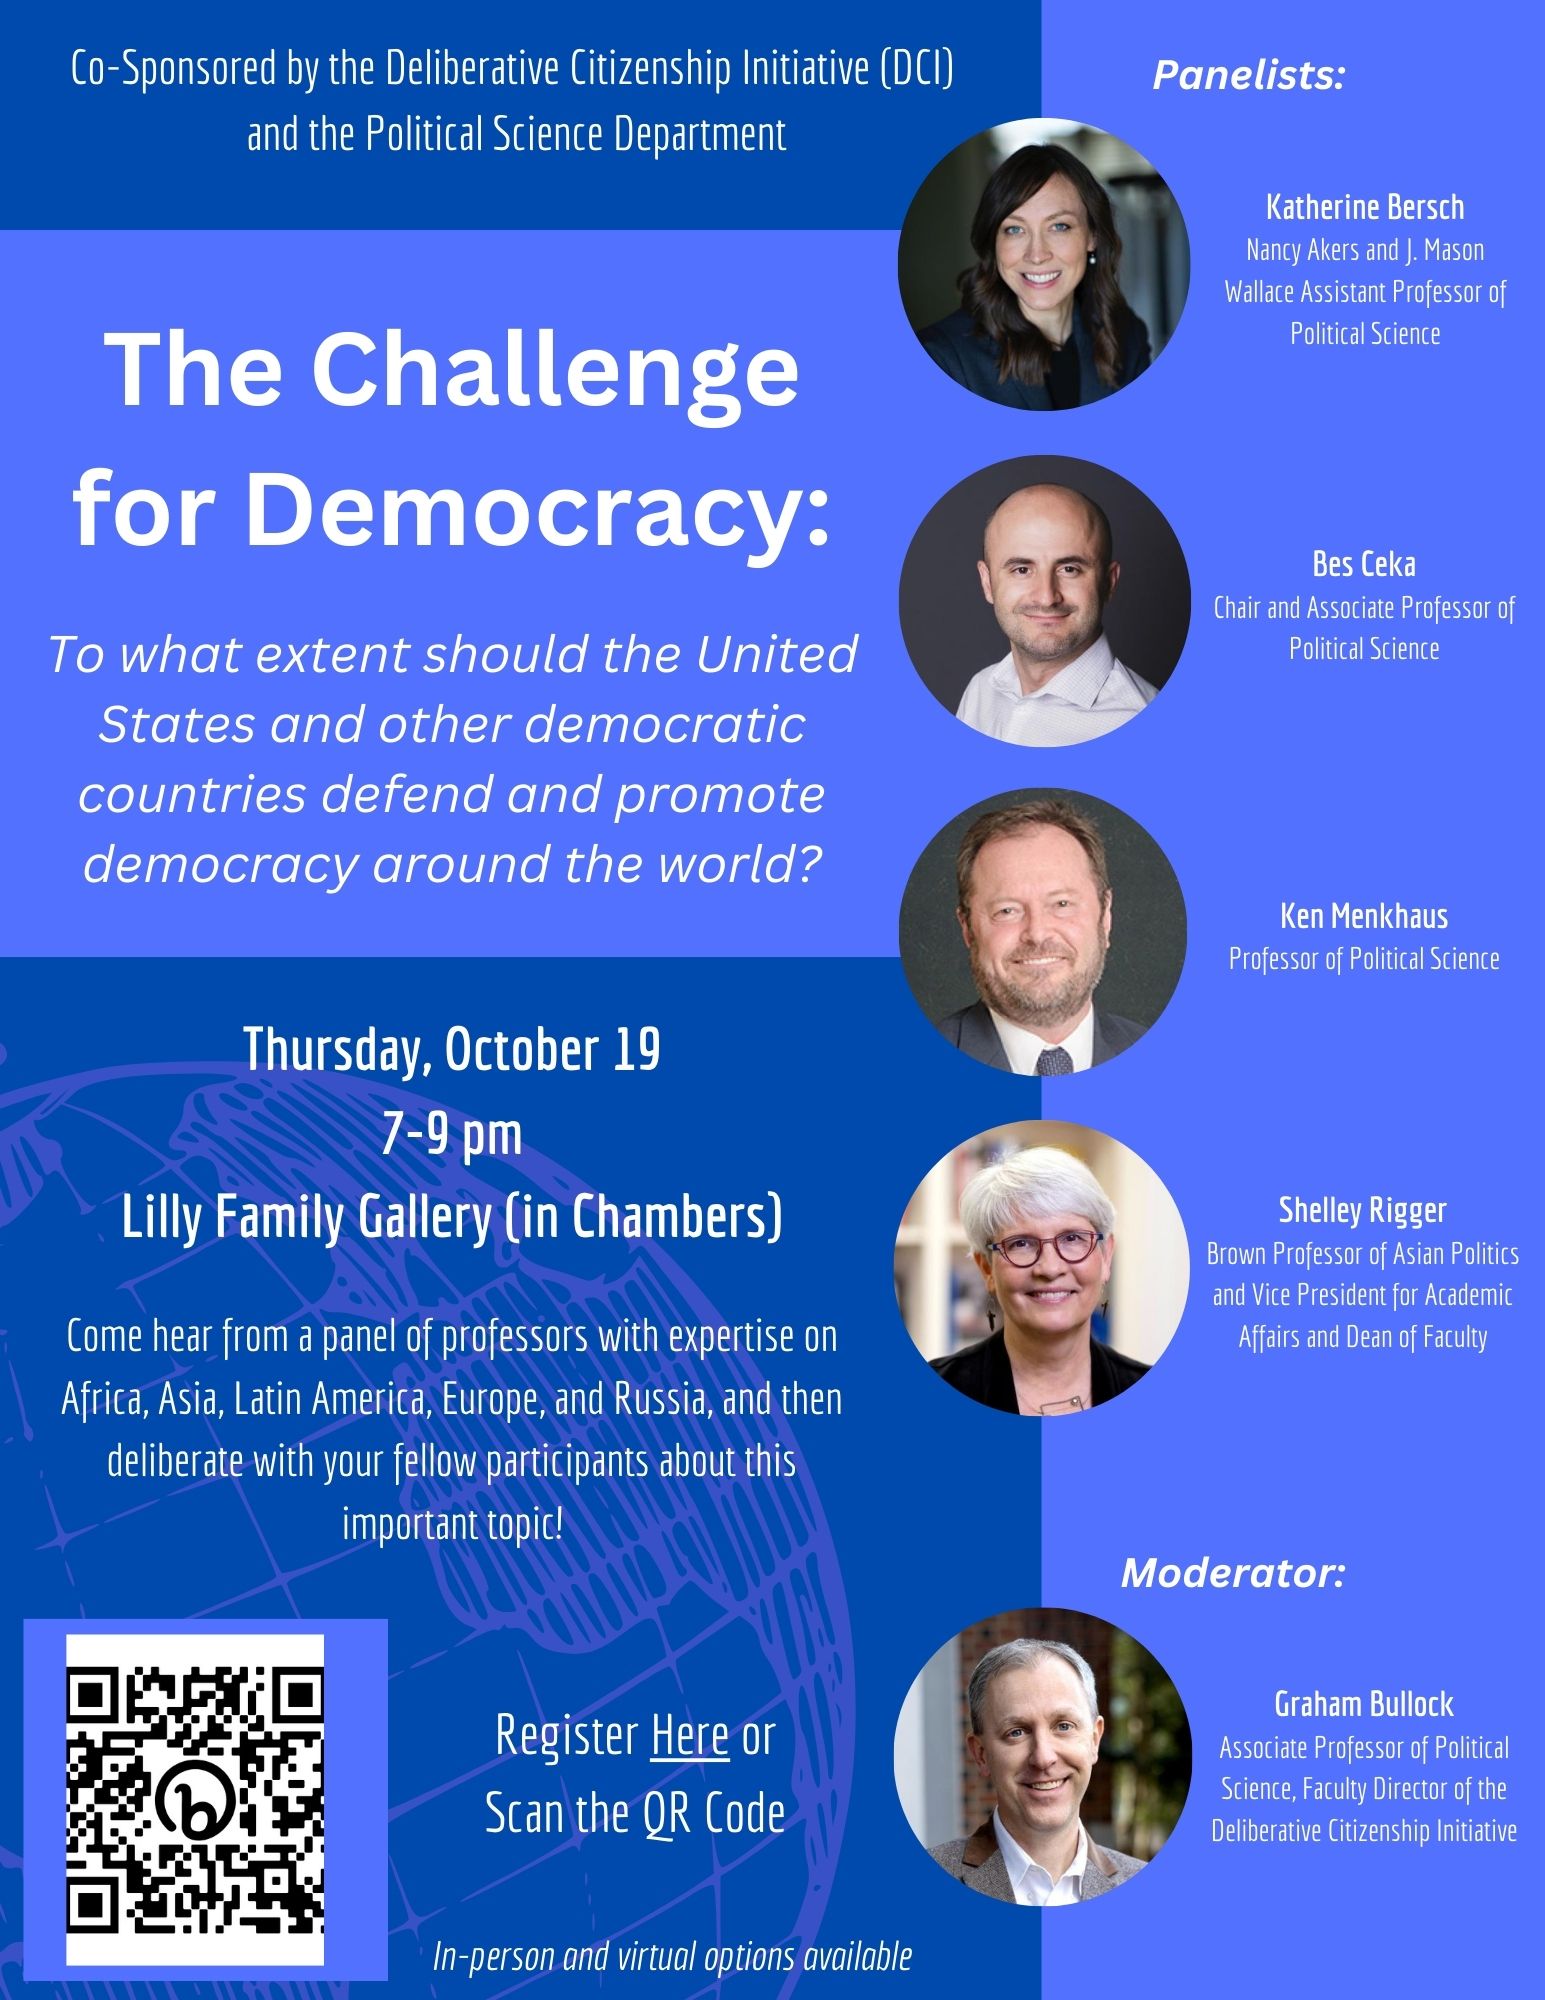 DCI and Political Science Department The Challenge for Democracy Event flyer.